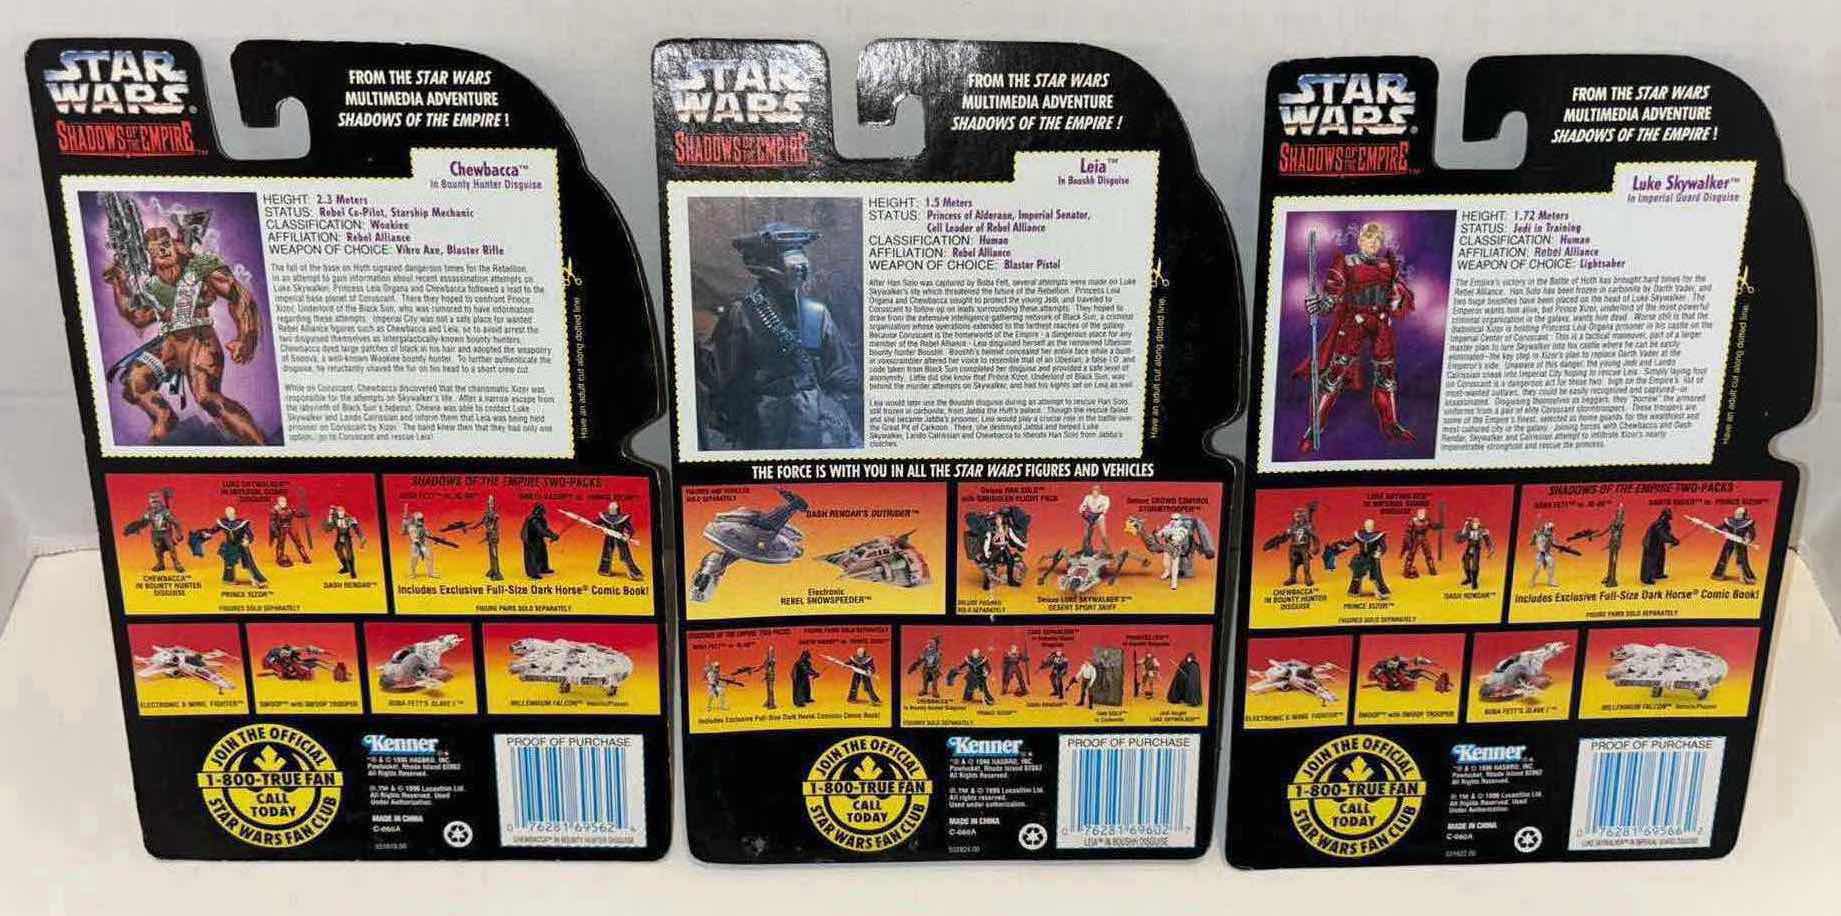 Photo 5 of NEW MINT COND 1996 HASBRO KENNER STAR WARS 3-PACK BUNDLE, SHADOWS OF THE EMPIRE “CHEWBACCA”, “LEIA” & “LUKE SKYWALKER” IN CLEAR CLAMSHELL PACKAGING